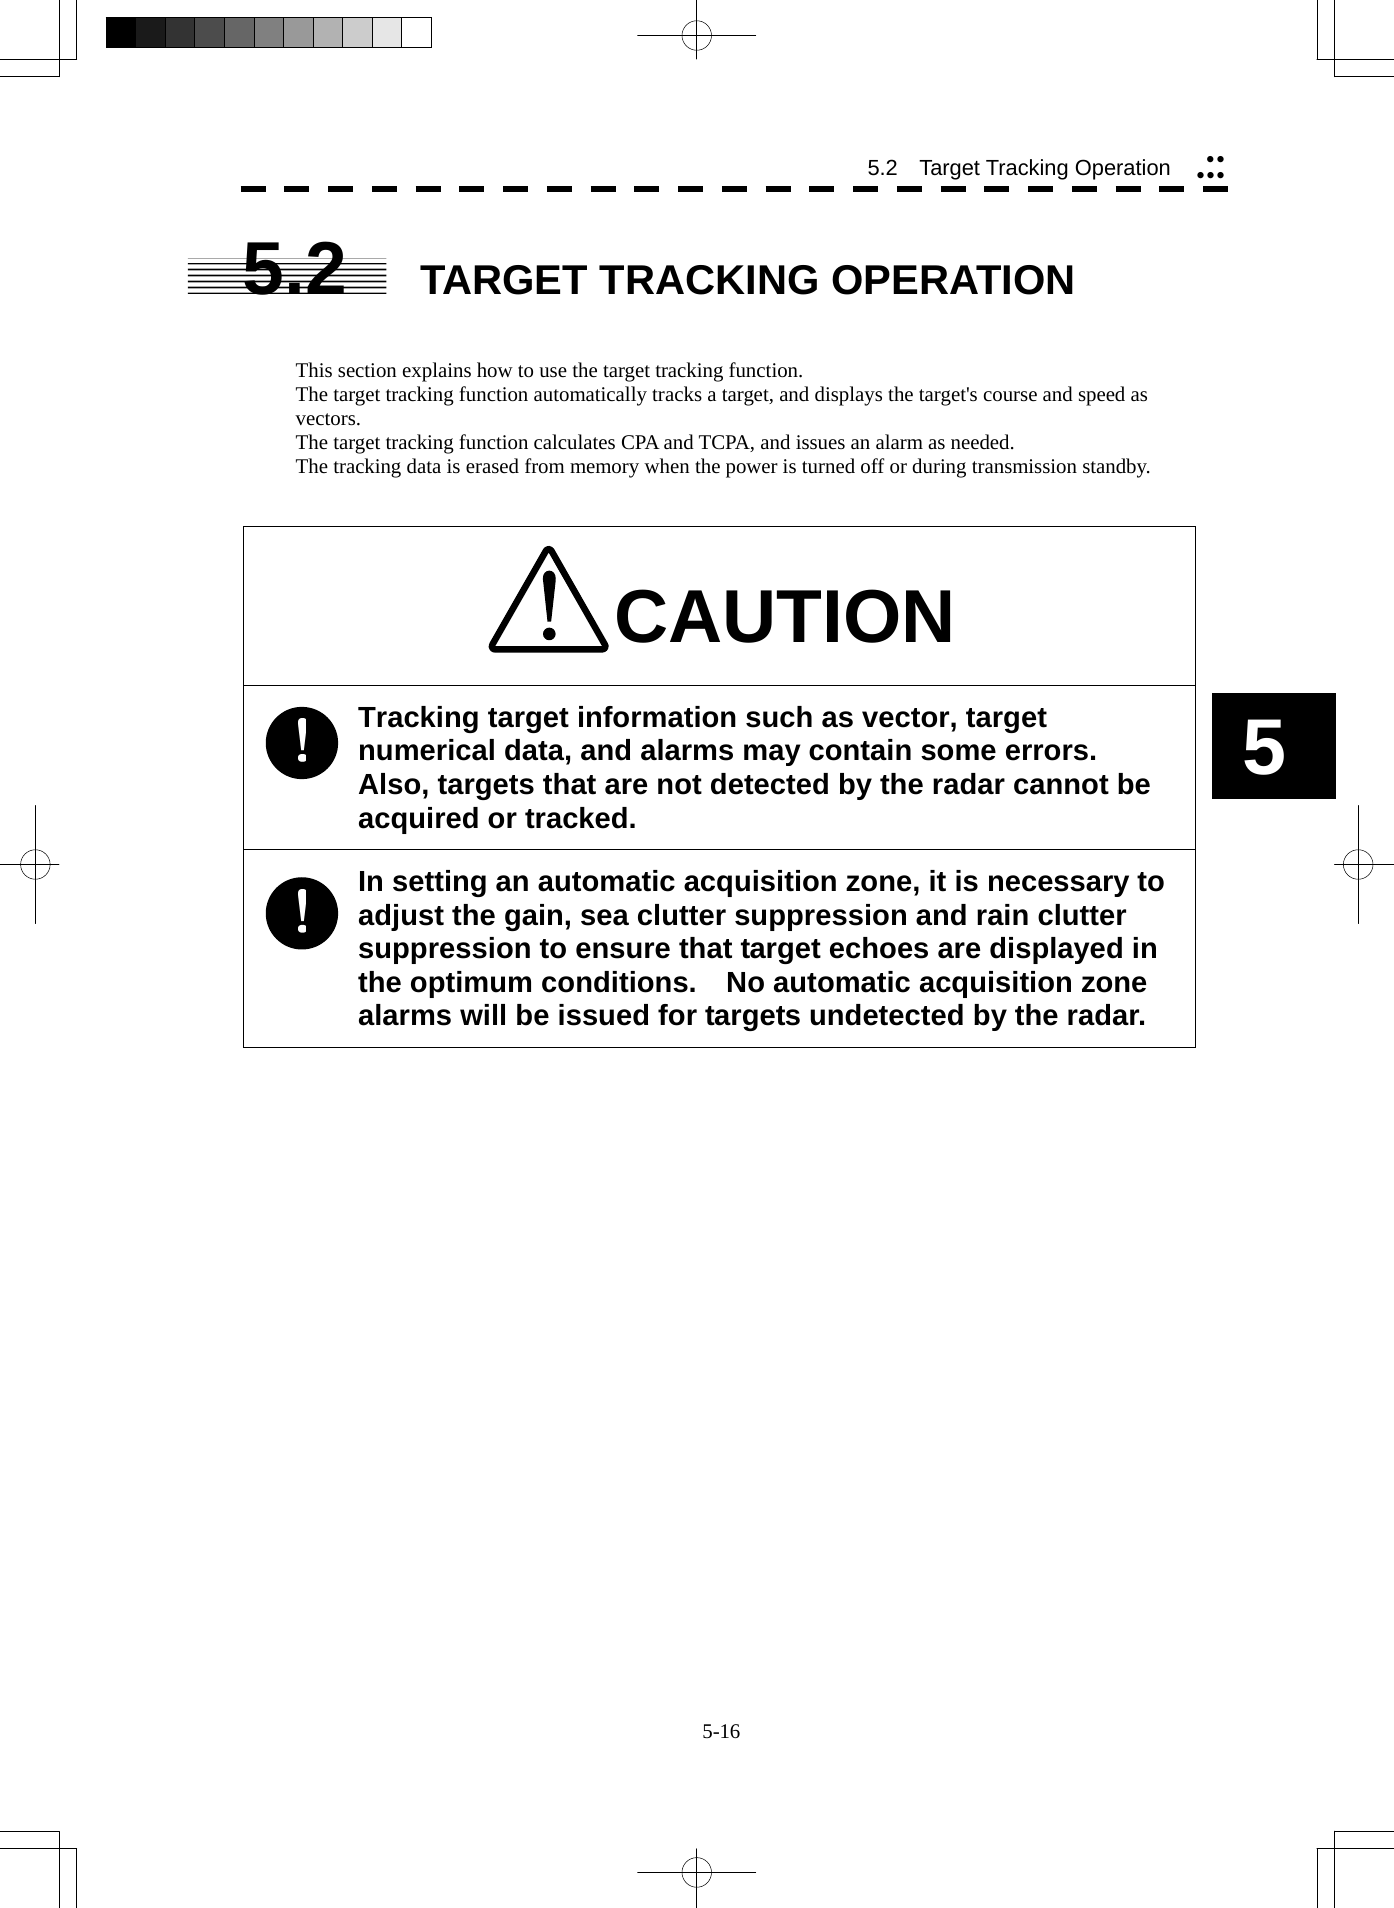  5-16 5.2   Target Tracking Operation yyyyy5 5.2  TARGET TRACKING OPERATION   This section explains how to use the target tracking function. The target tracking function automatically tracks a target, and displays the target&apos;s course and speed as vectors. The target tracking function calculates CPA and TCPA, and issues an alarm as needed. The tracking data is erased from memory when the power is turned off or during transmission standby.   CAUTION Tracking target information such as vector, target numerical data, and alarms may contain some errors.   Also, targets that are not detected by the radar cannot be acquired or tracked. In setting an automatic acquisition zone, it is necessary to adjust the gain, sea clutter suppression and rain clutter suppression to ensure that target echoes are displayed in the optimum conditions.    No automatic acquisition zone alarms will be issued for targets undetected by the radar.   